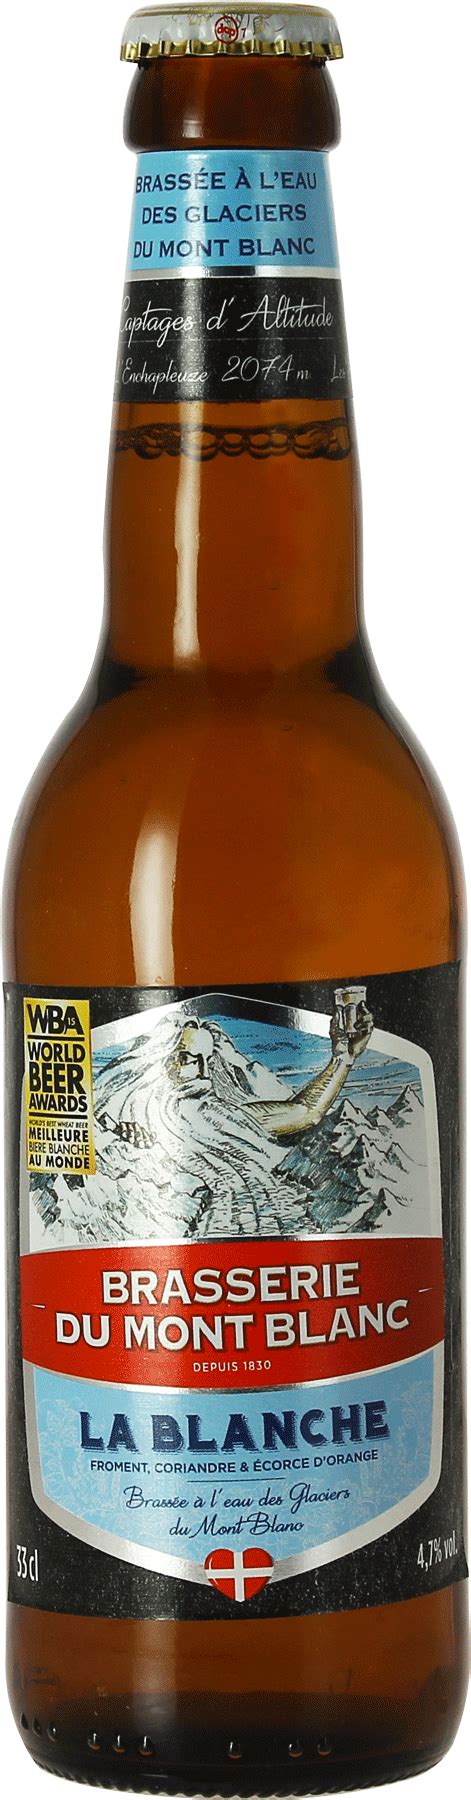 Blanche Du Mont Blanc French Wheat Beer Buy White Ale Beer Online